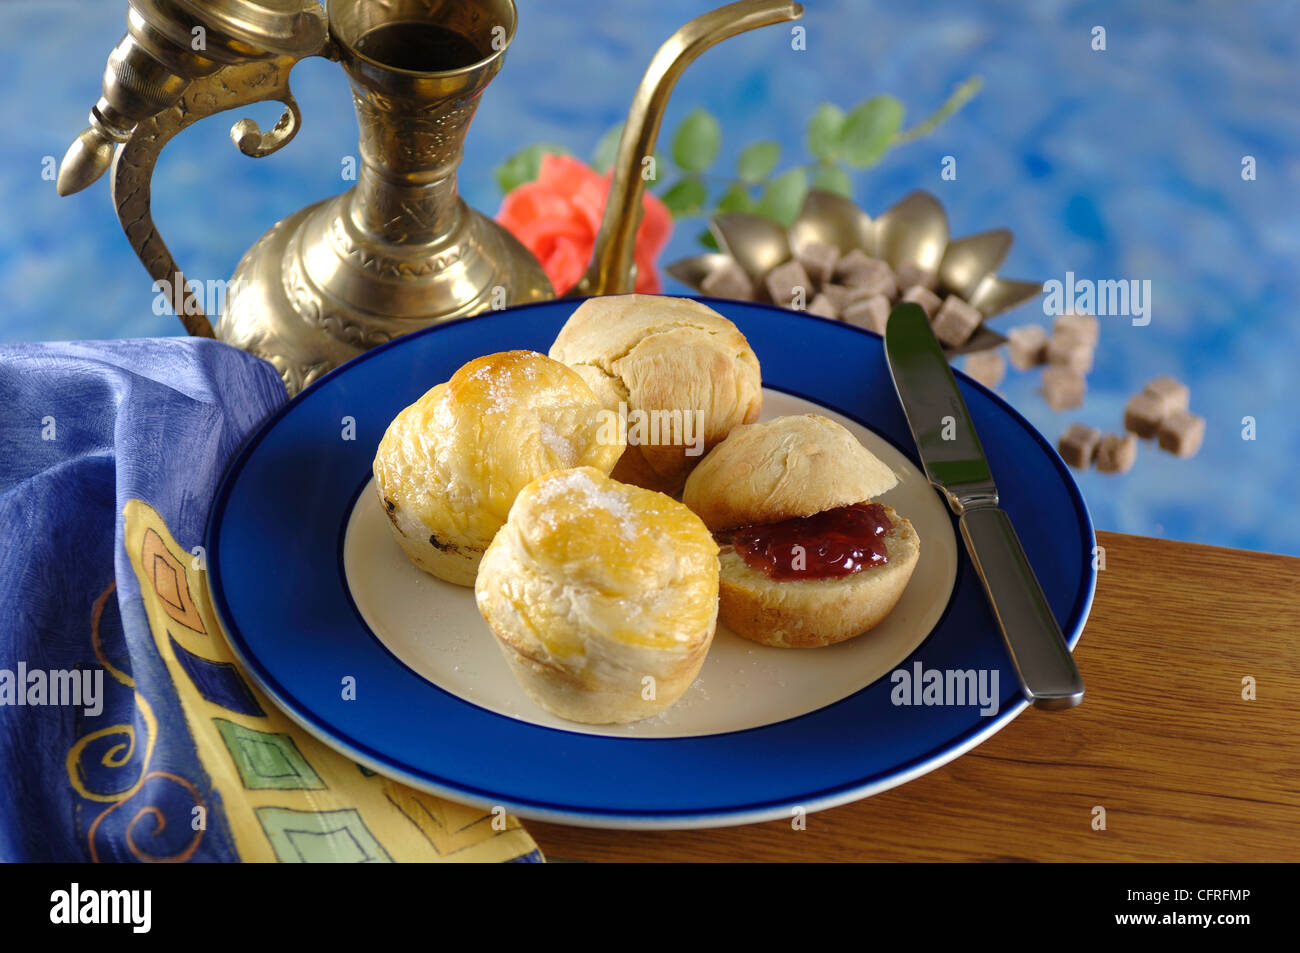 Nice and delicious dessert on porcelain plate. (Studio photo) Stock Photo